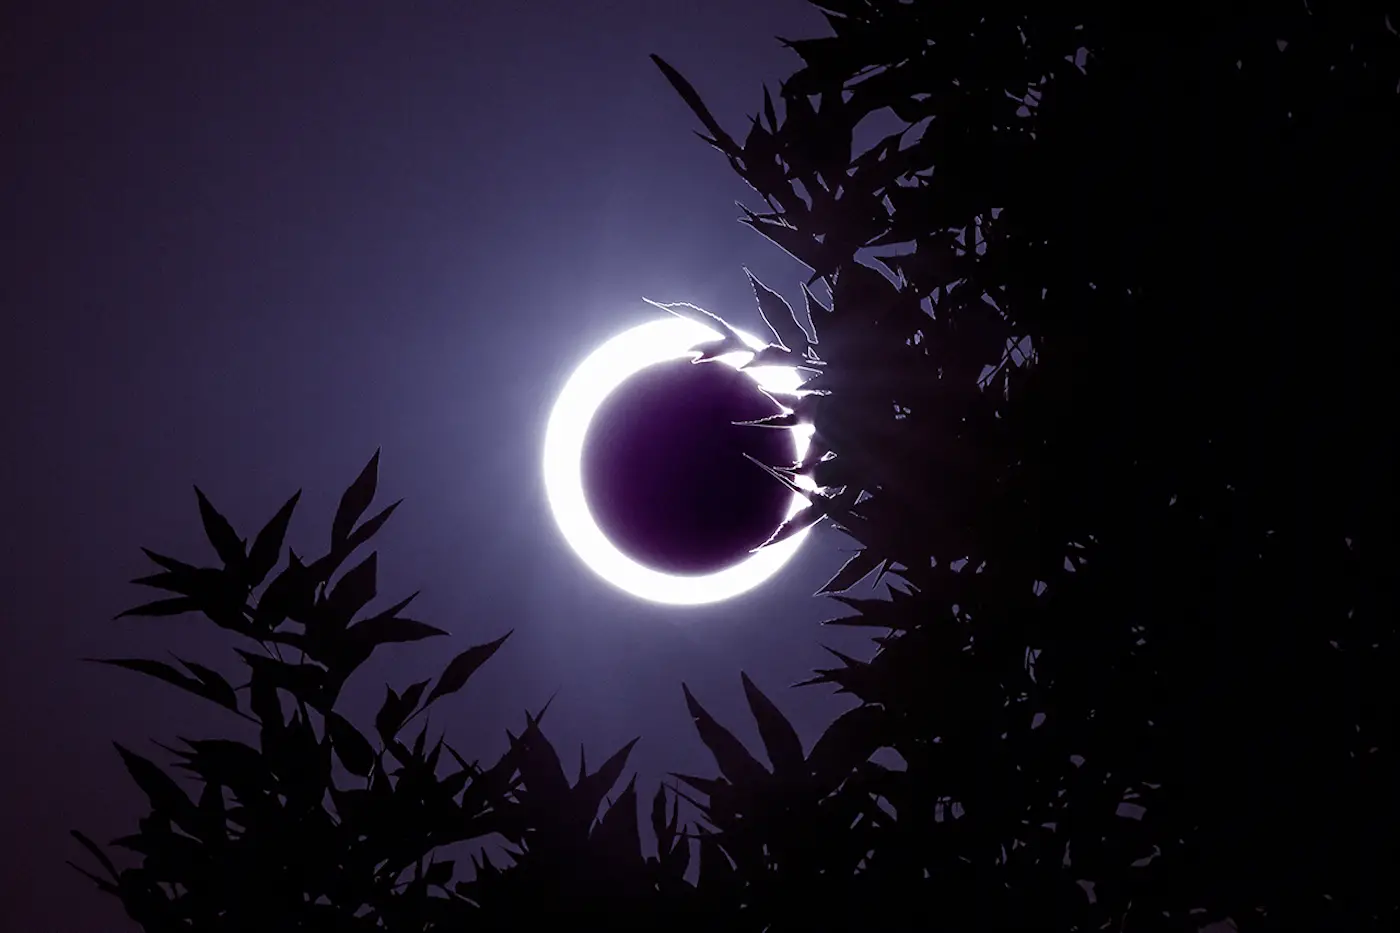 History Of Ring Of Fire Eclipse